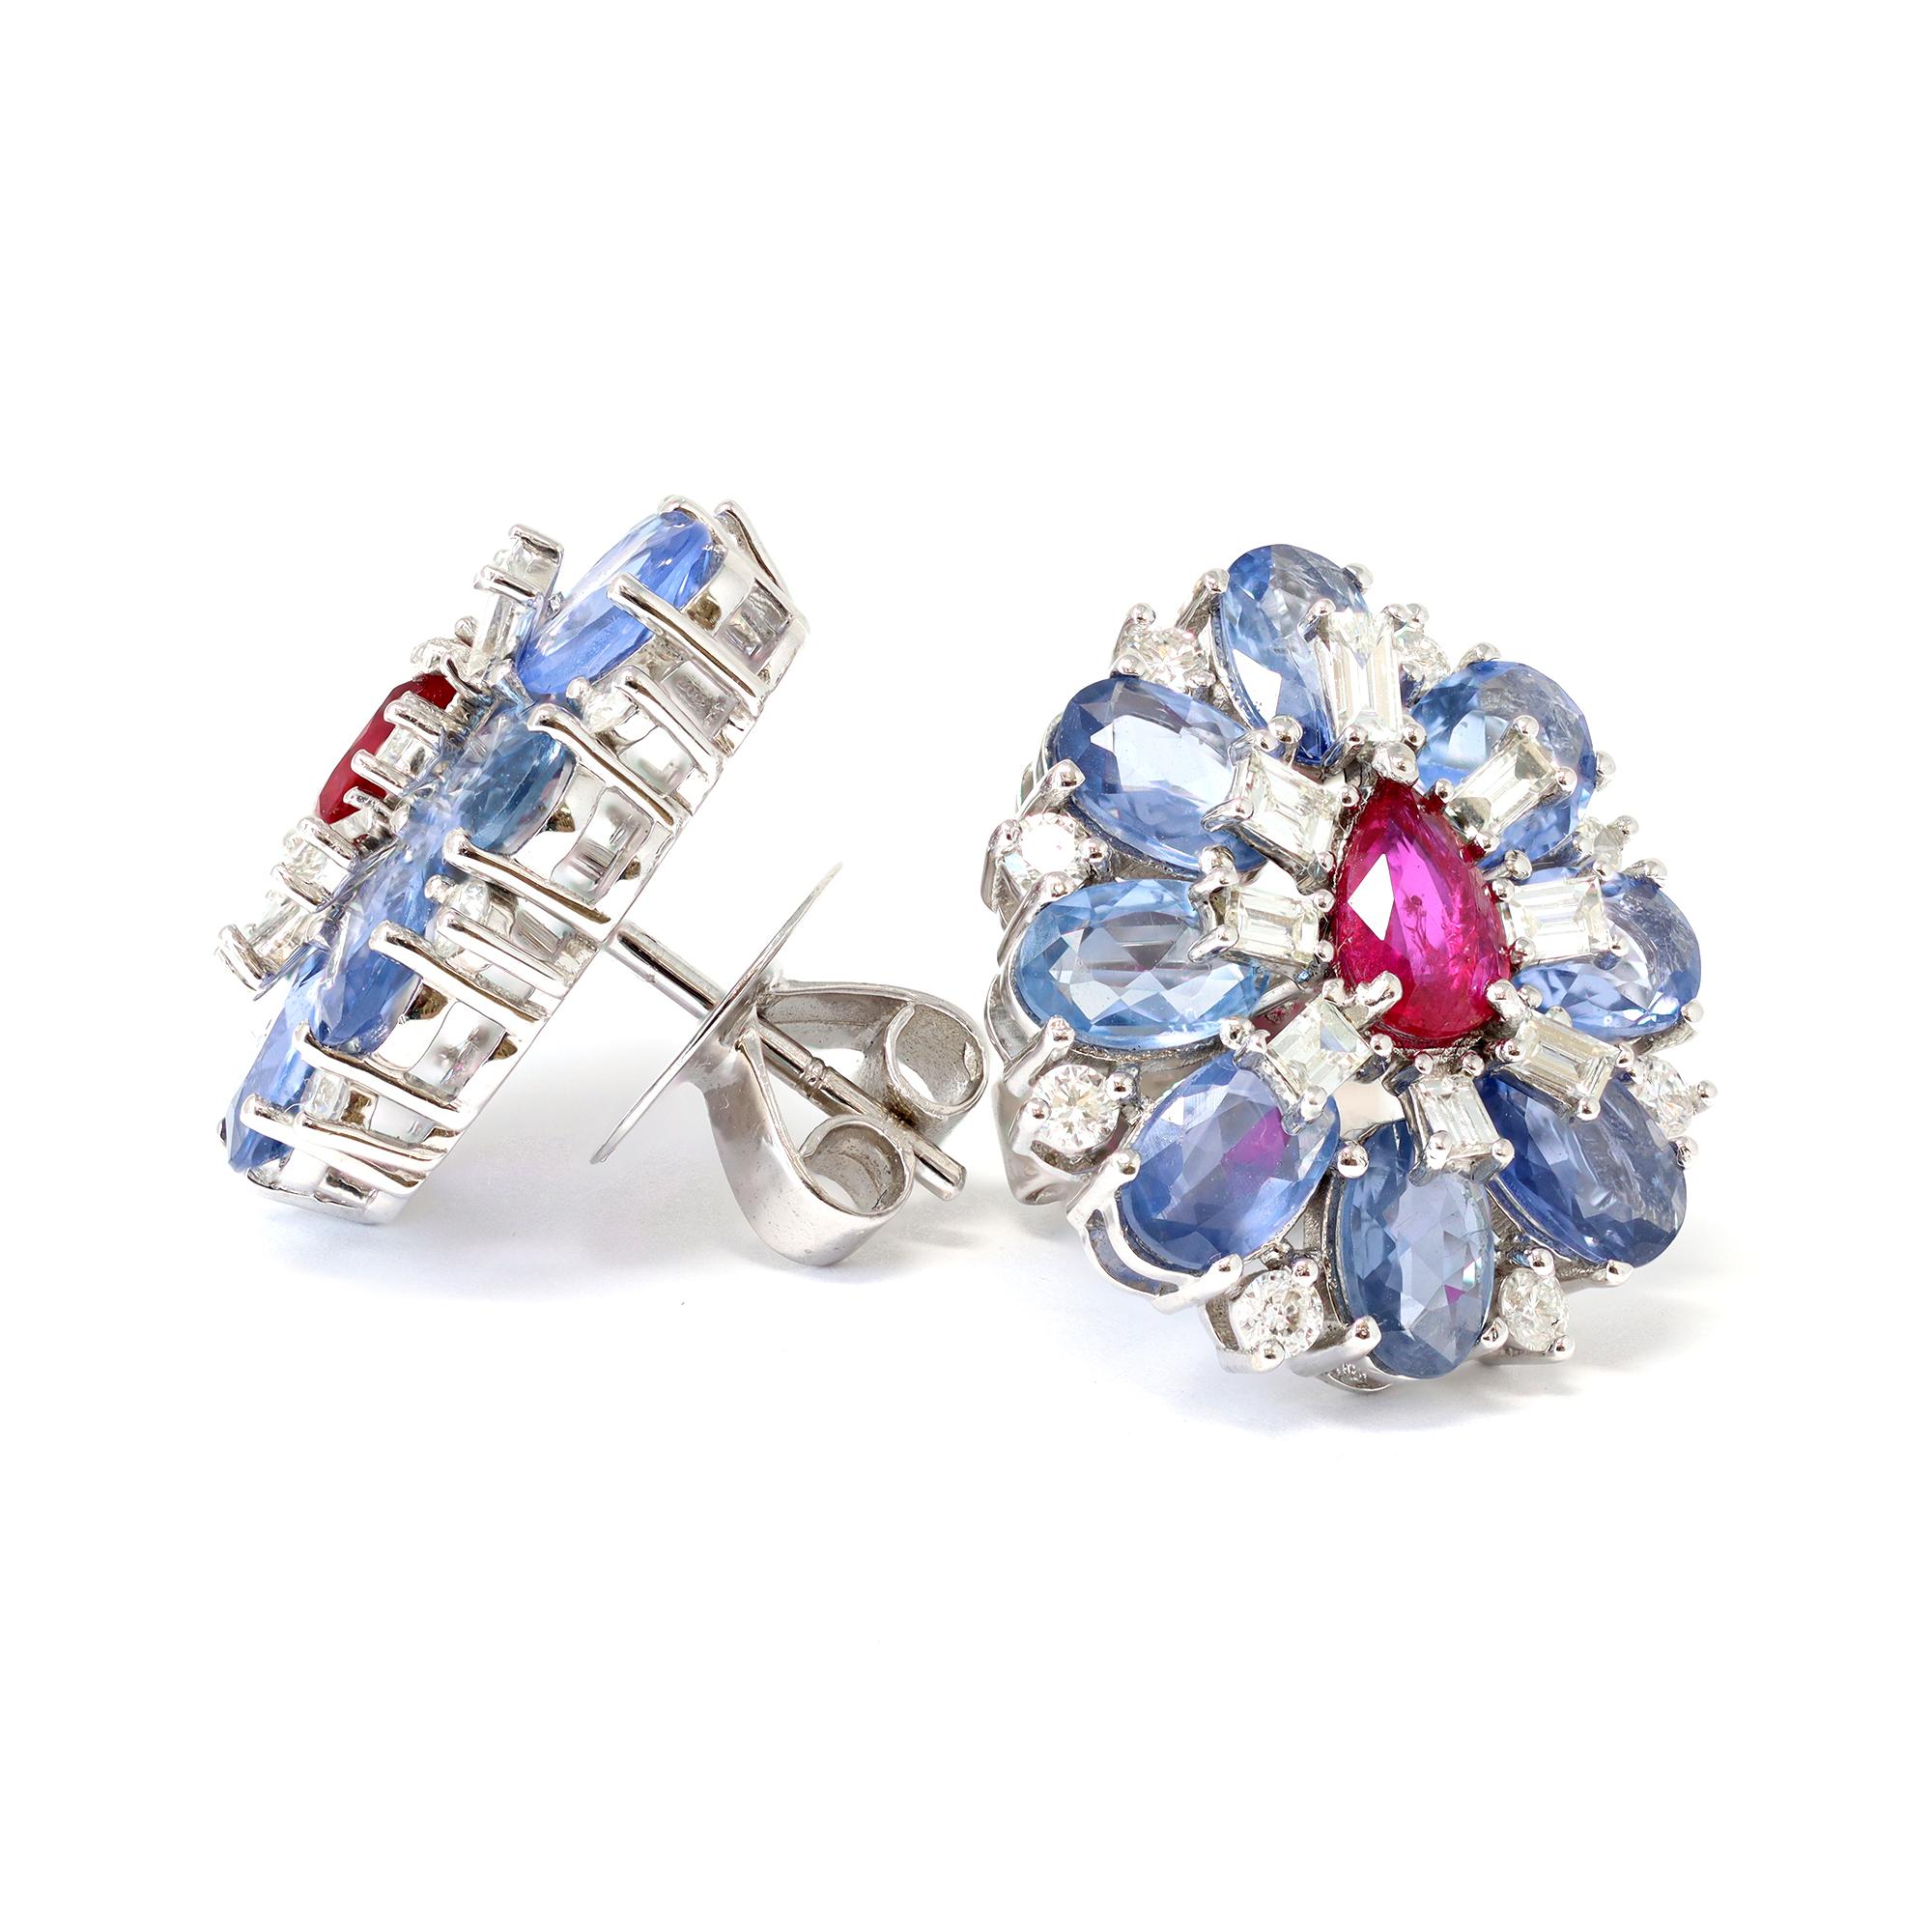 A Lovely cluster earrings Circa 1980-90, in the form of a pear shape design composed of blue sapphires, mixed cut diamonds, and a pear shape ruby in the center. The natural sapphires are very well matched, oval in shape, and displaying a lighter